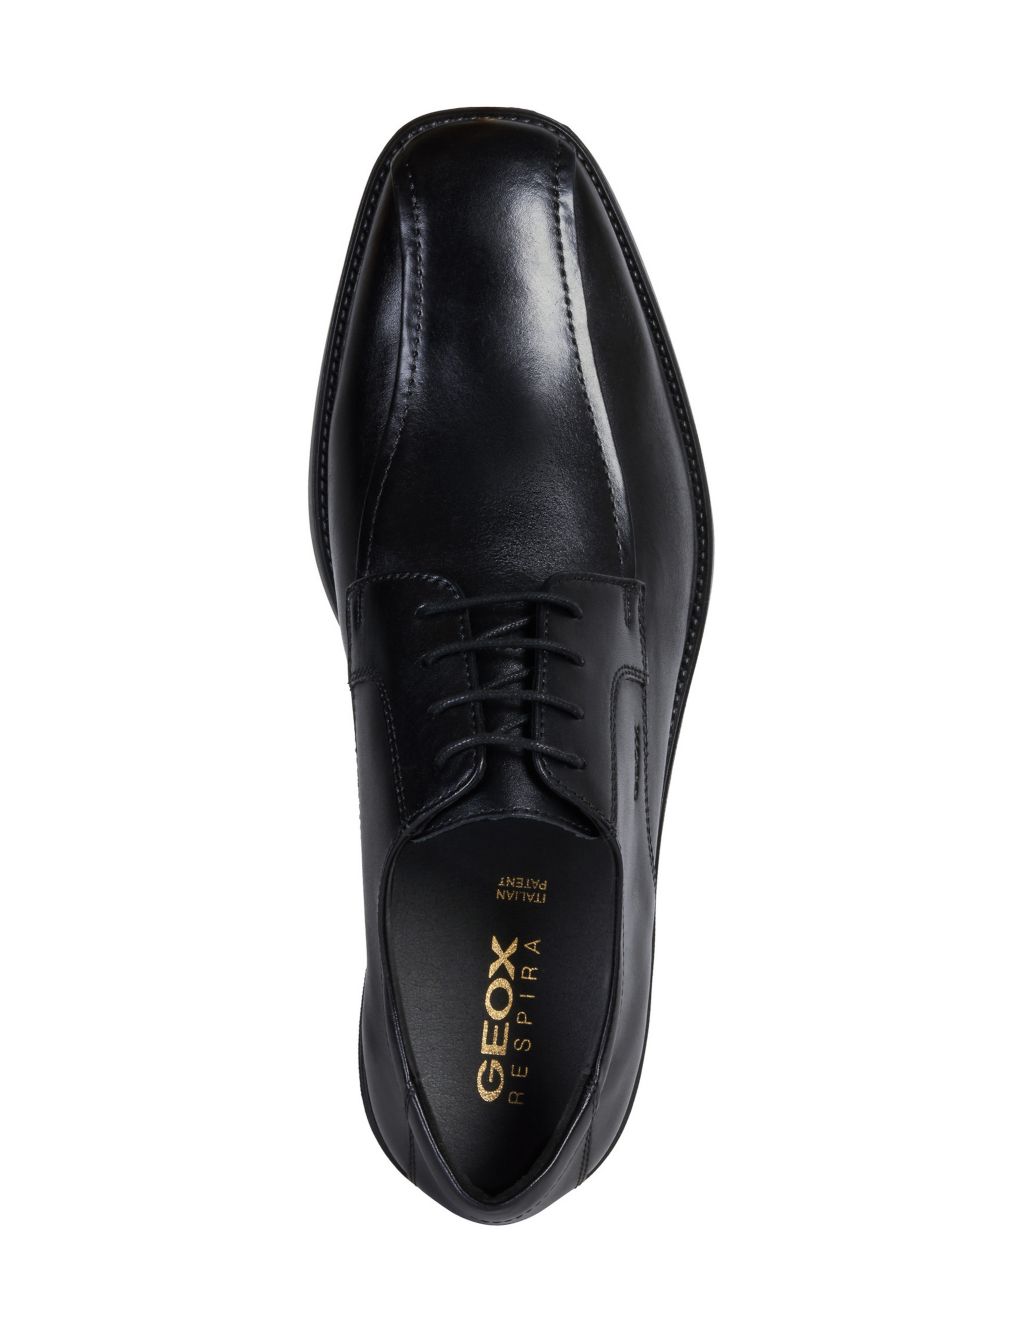 Wide Fit Leather Oxford Shoes image 5